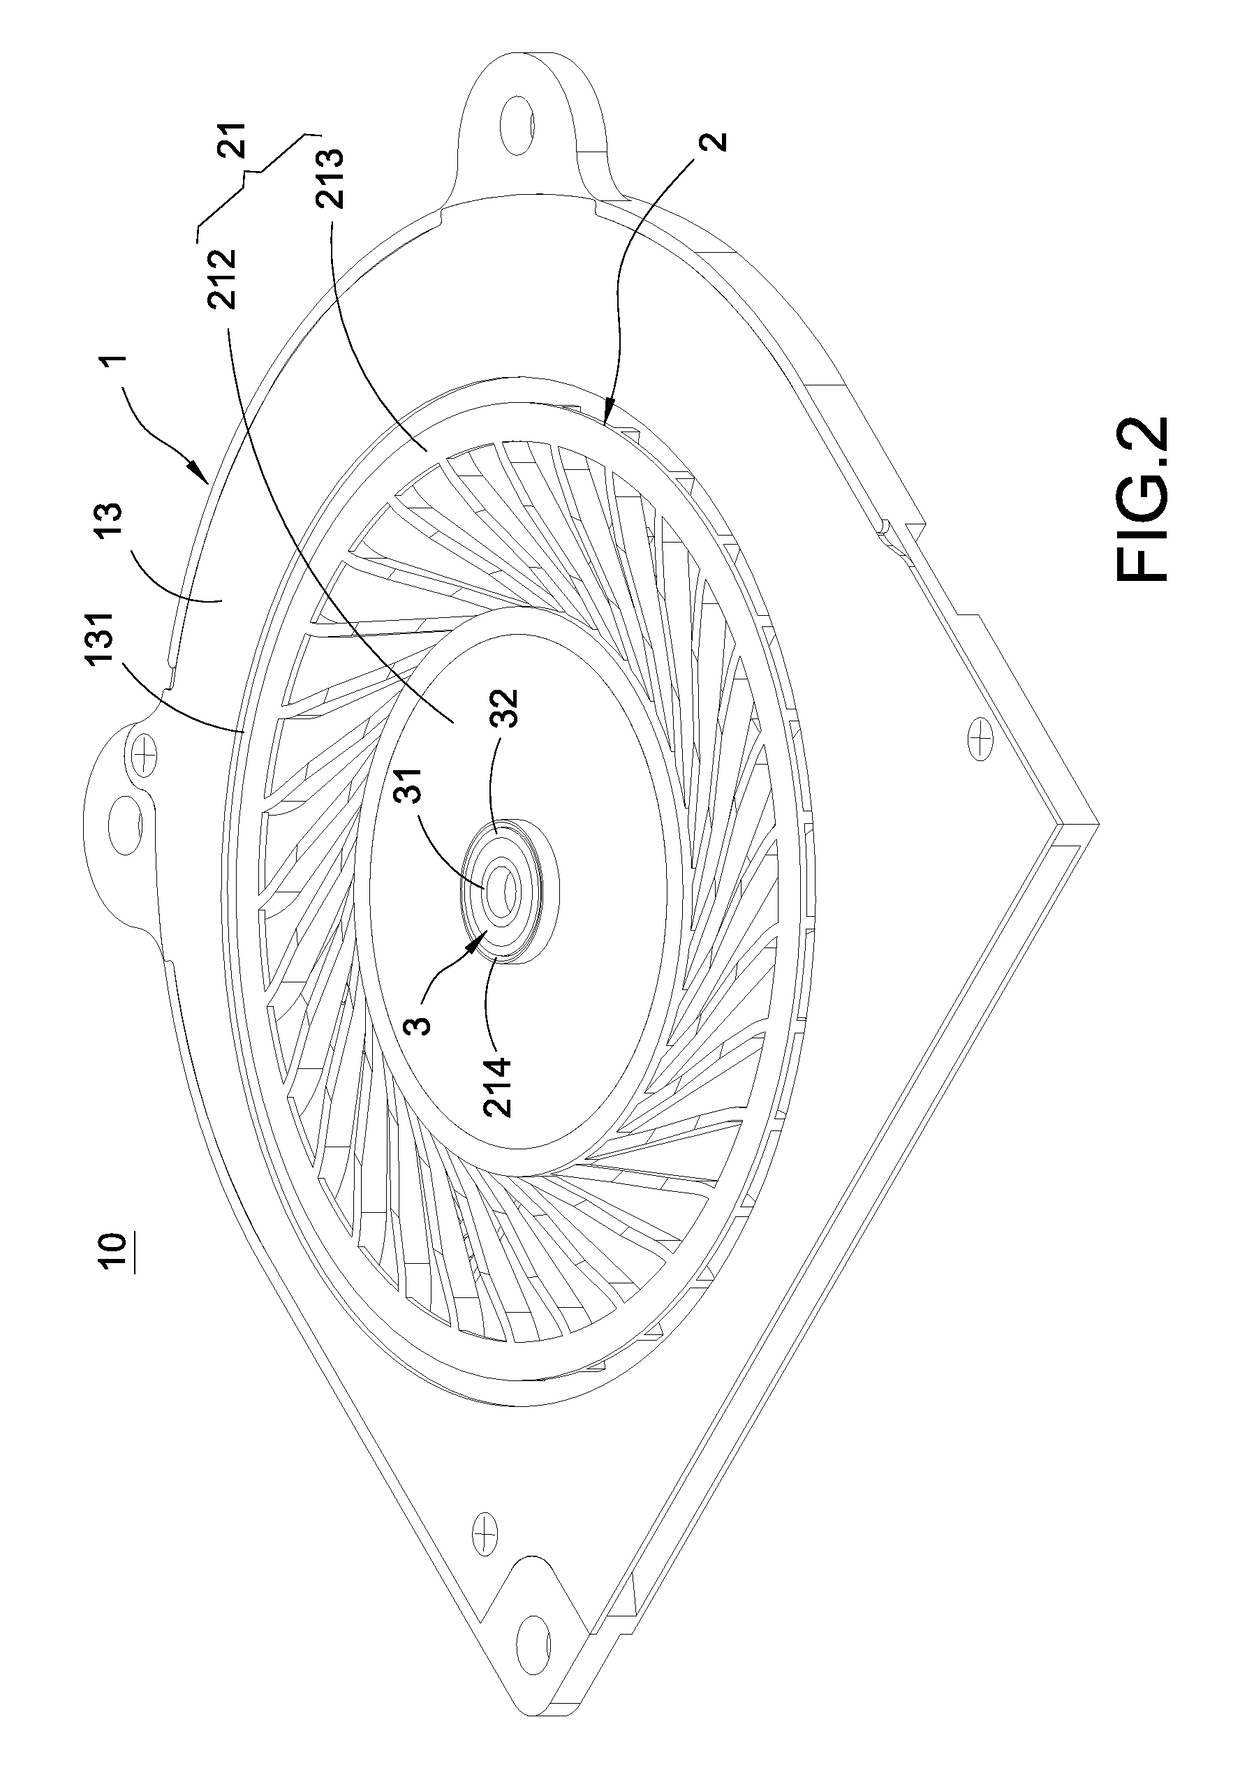 Shaftless fan structure having axial air slit